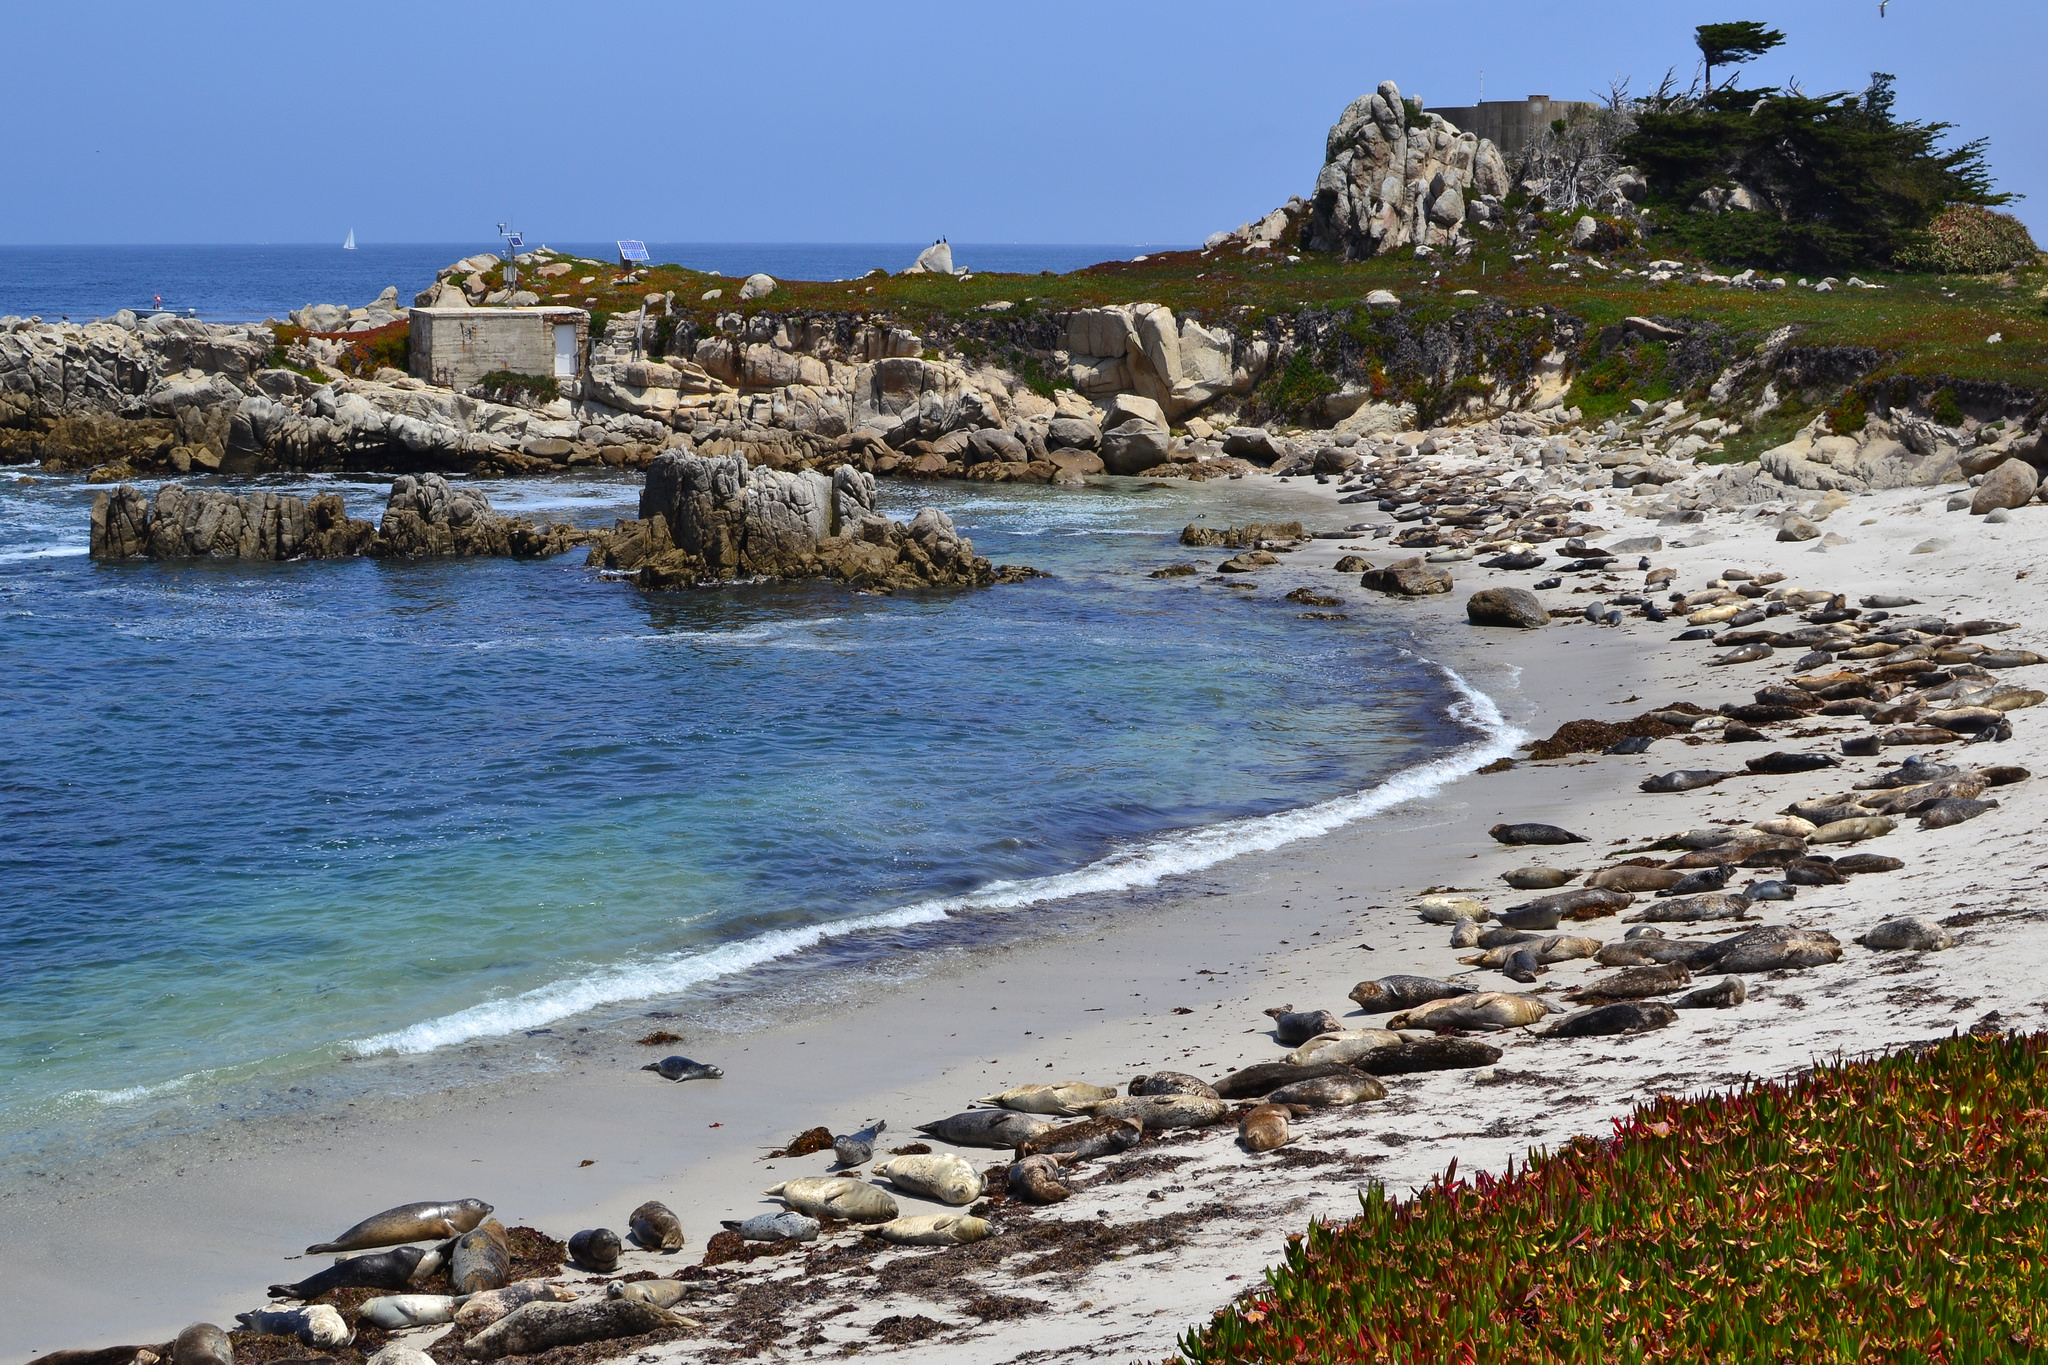 Seals sun themselves on the beach adjacent to the Hopkins Marine Station in Pacific Grove, California.